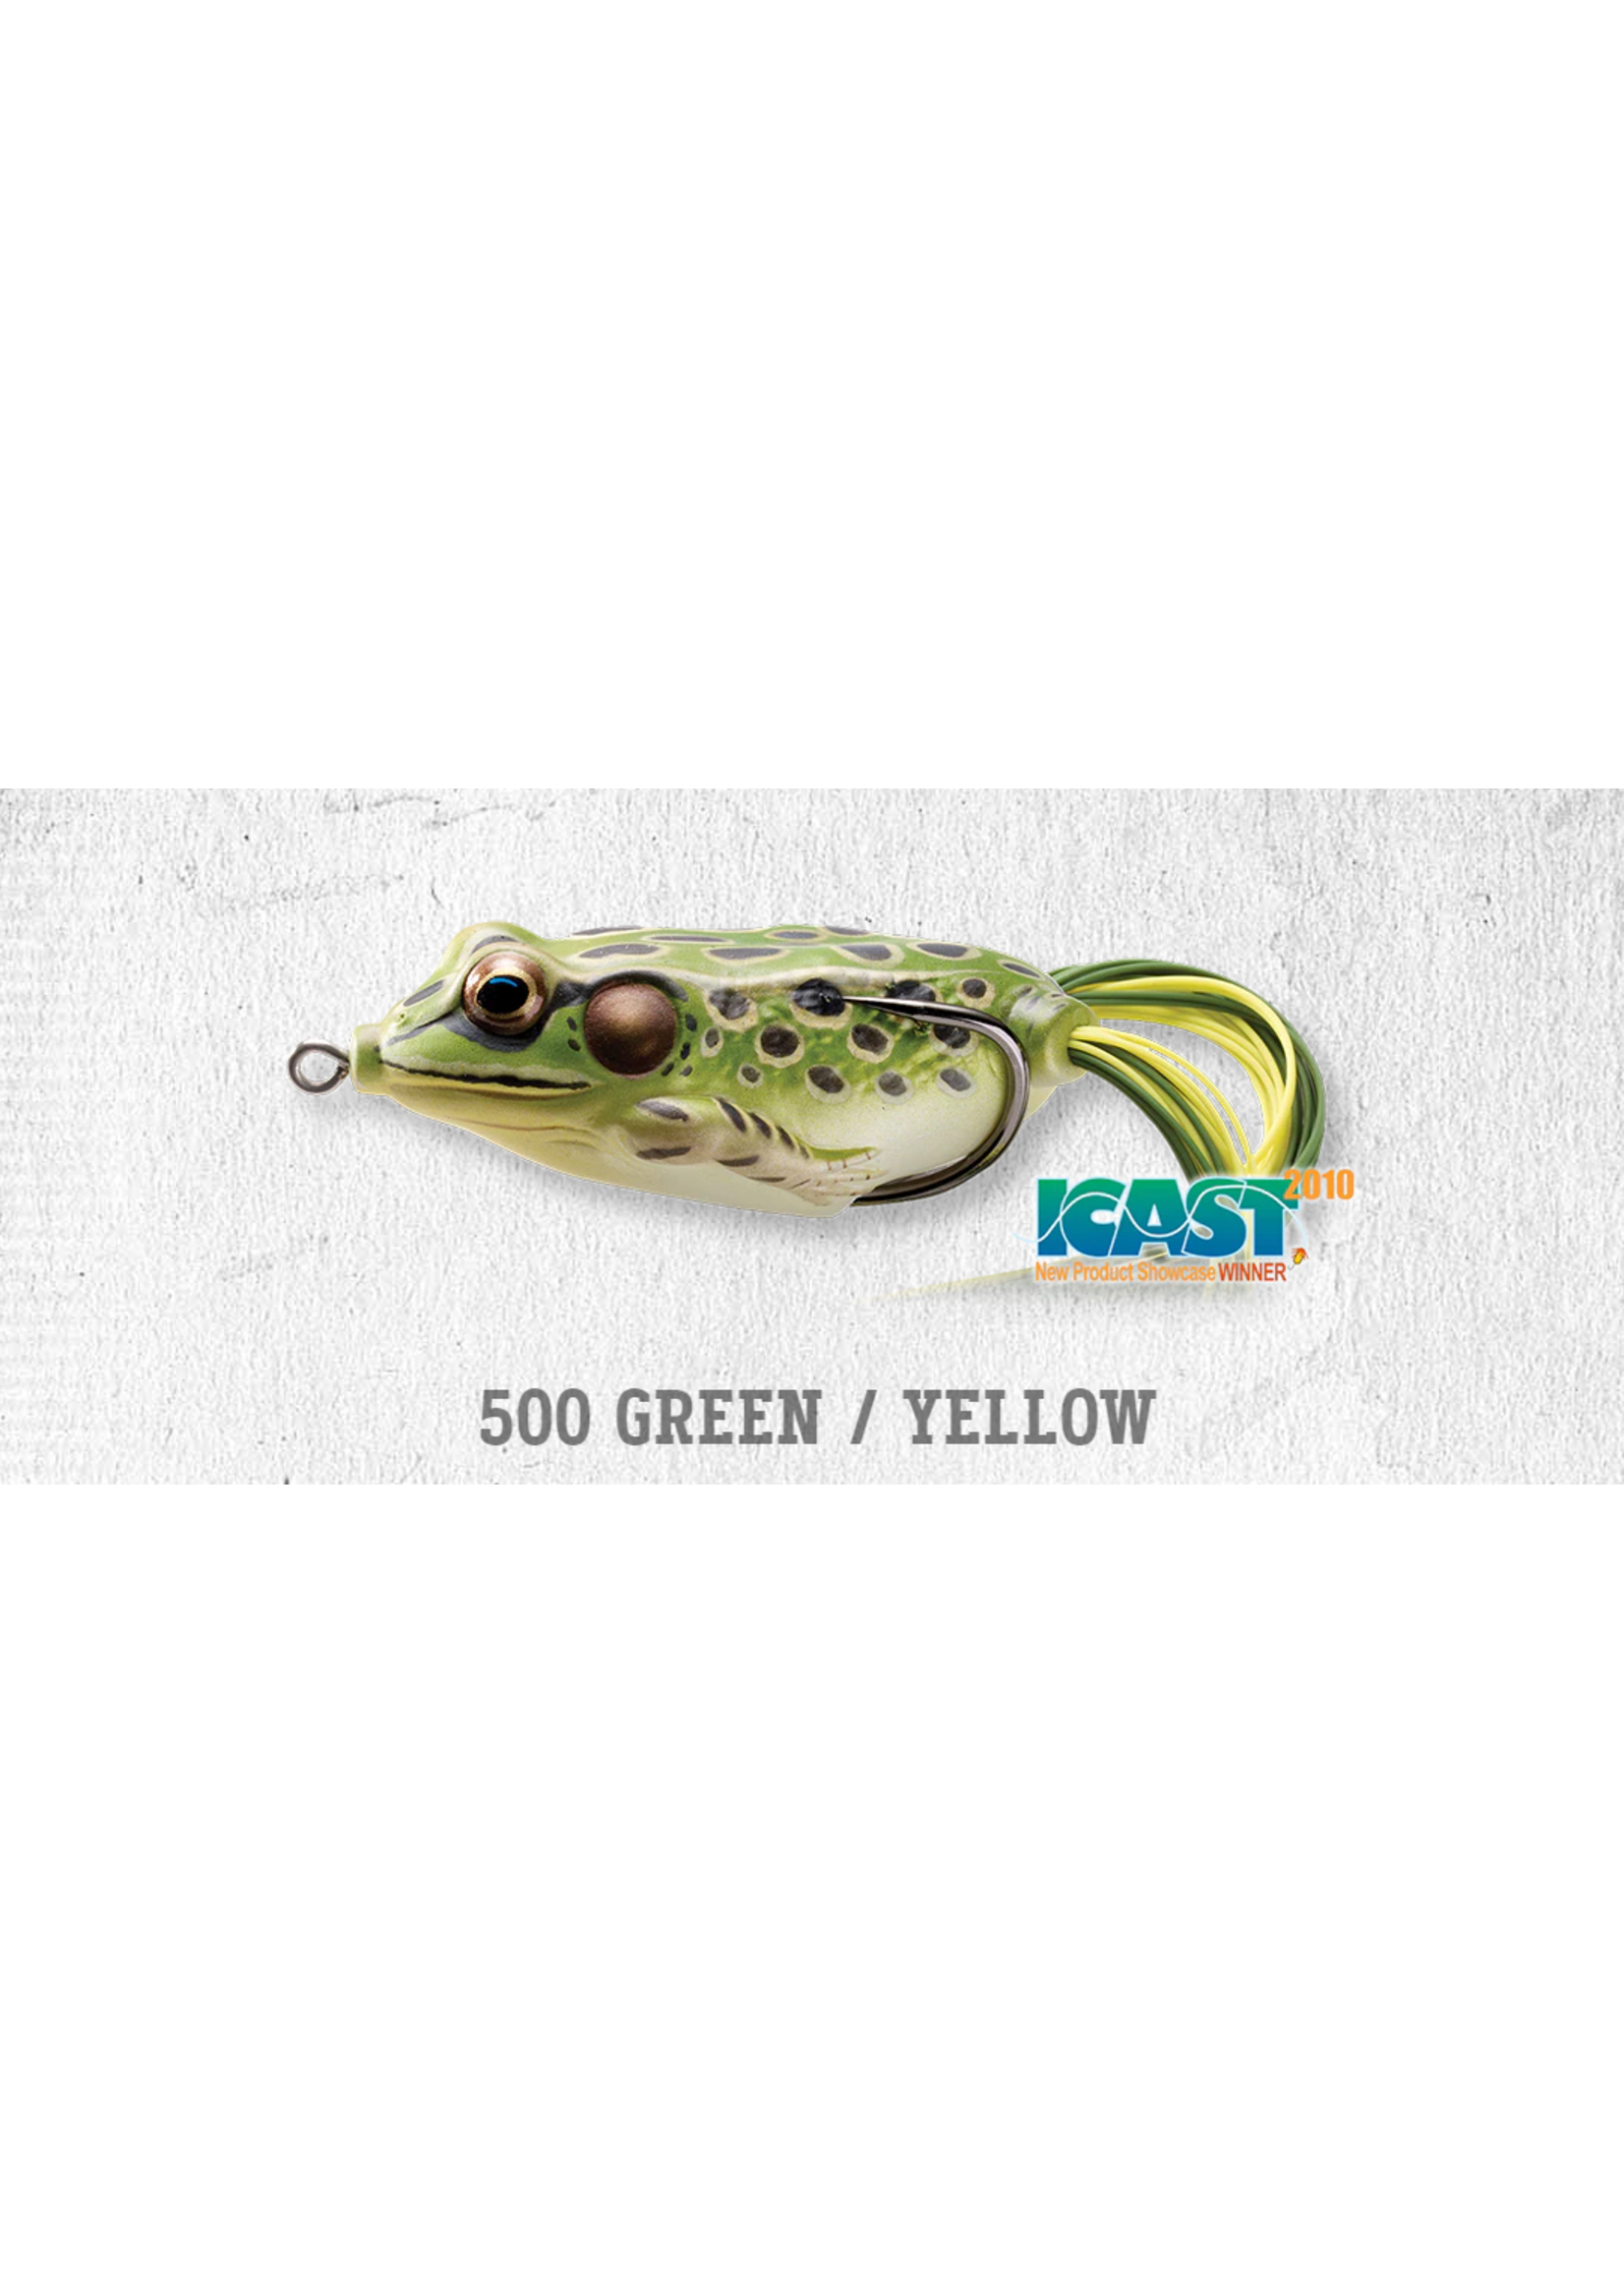 Live Target Hollow Body Frog - 1.75" Green / Yellow